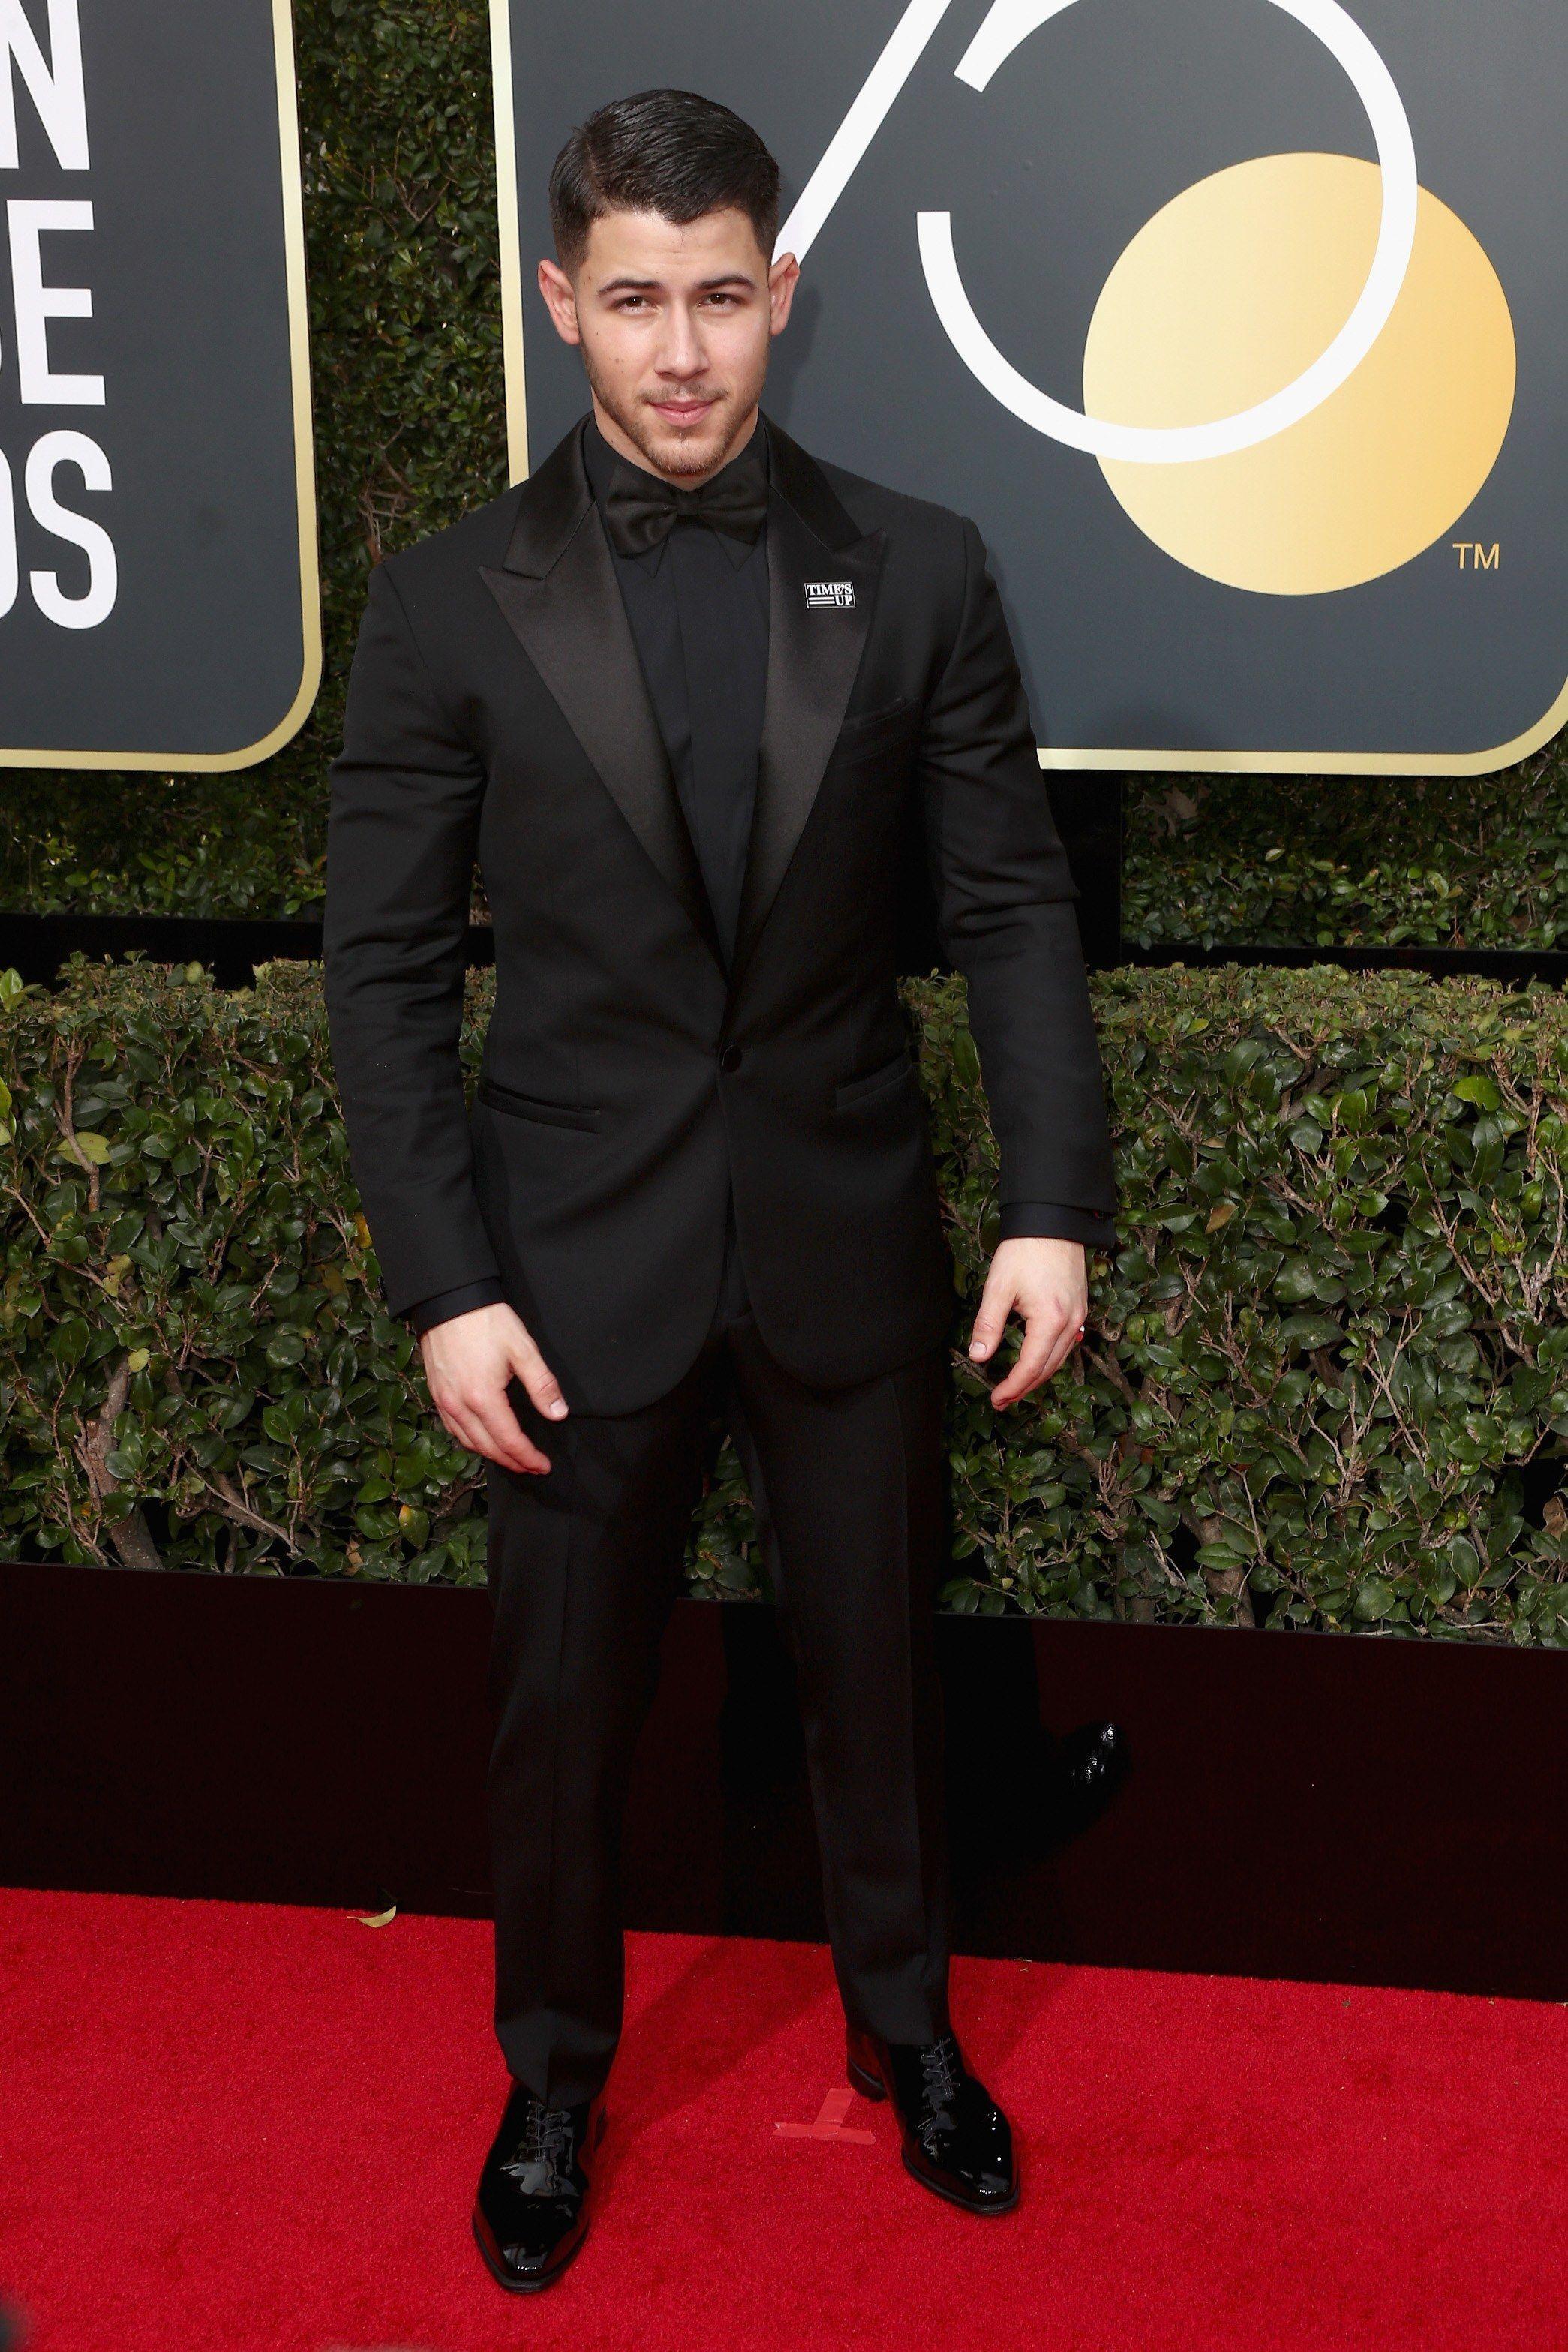 Golden Globes 2018: Fashion—Live From the Red Carpet. Nick jonas